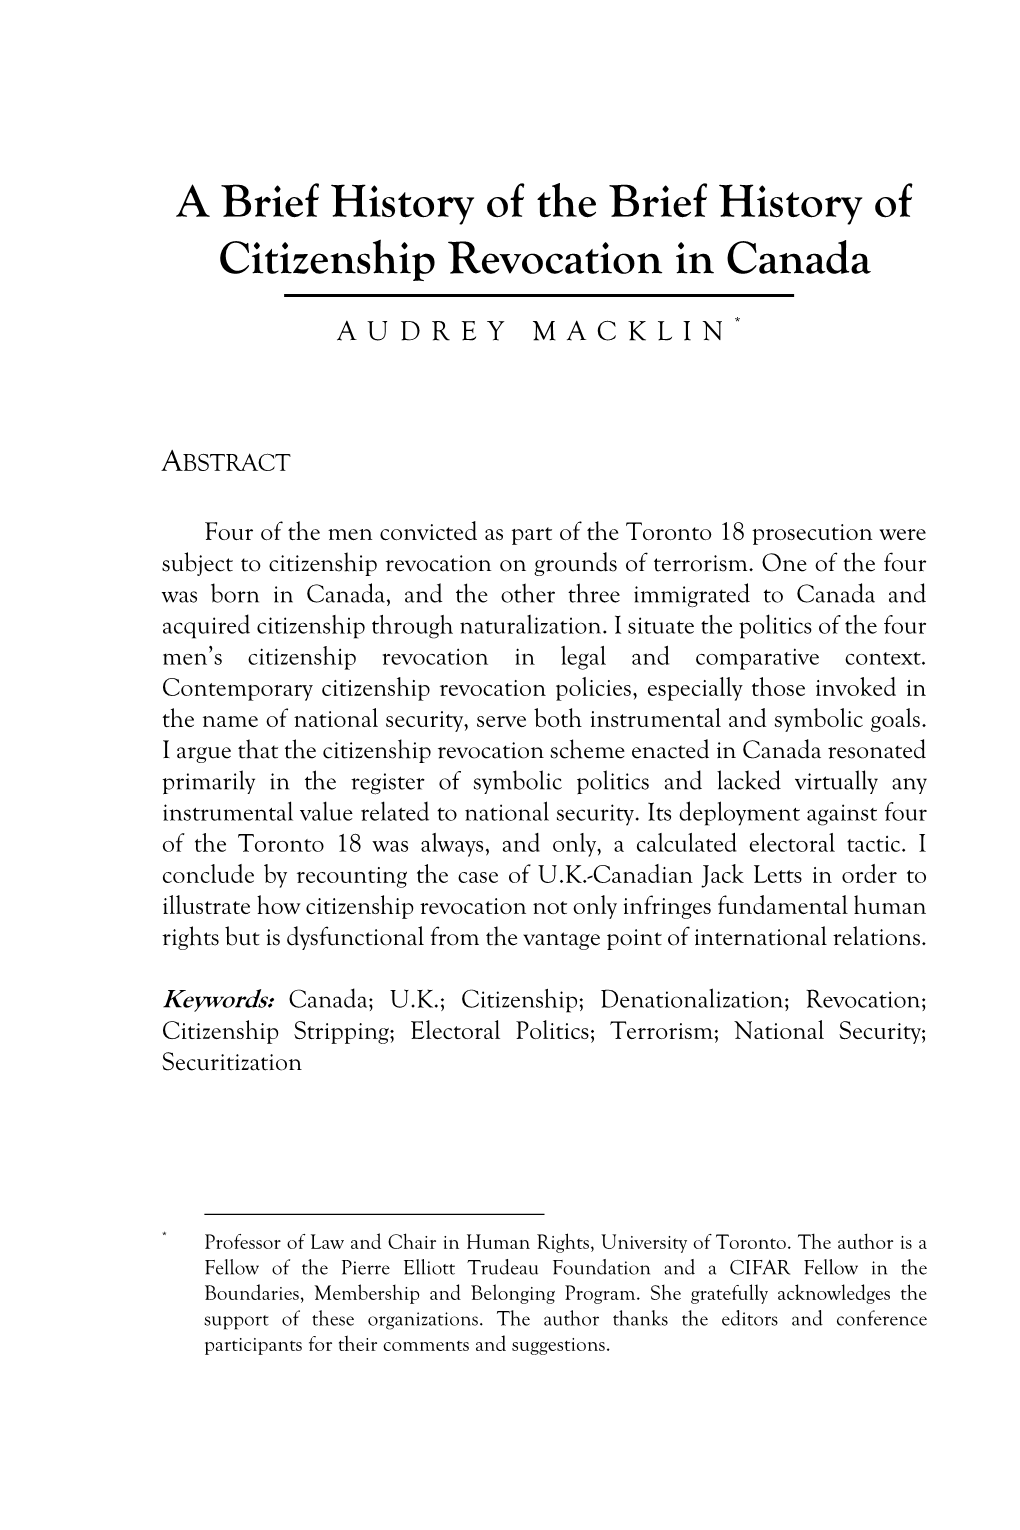 A Brief History of the Brief History of Citizenship Revocation in Canada